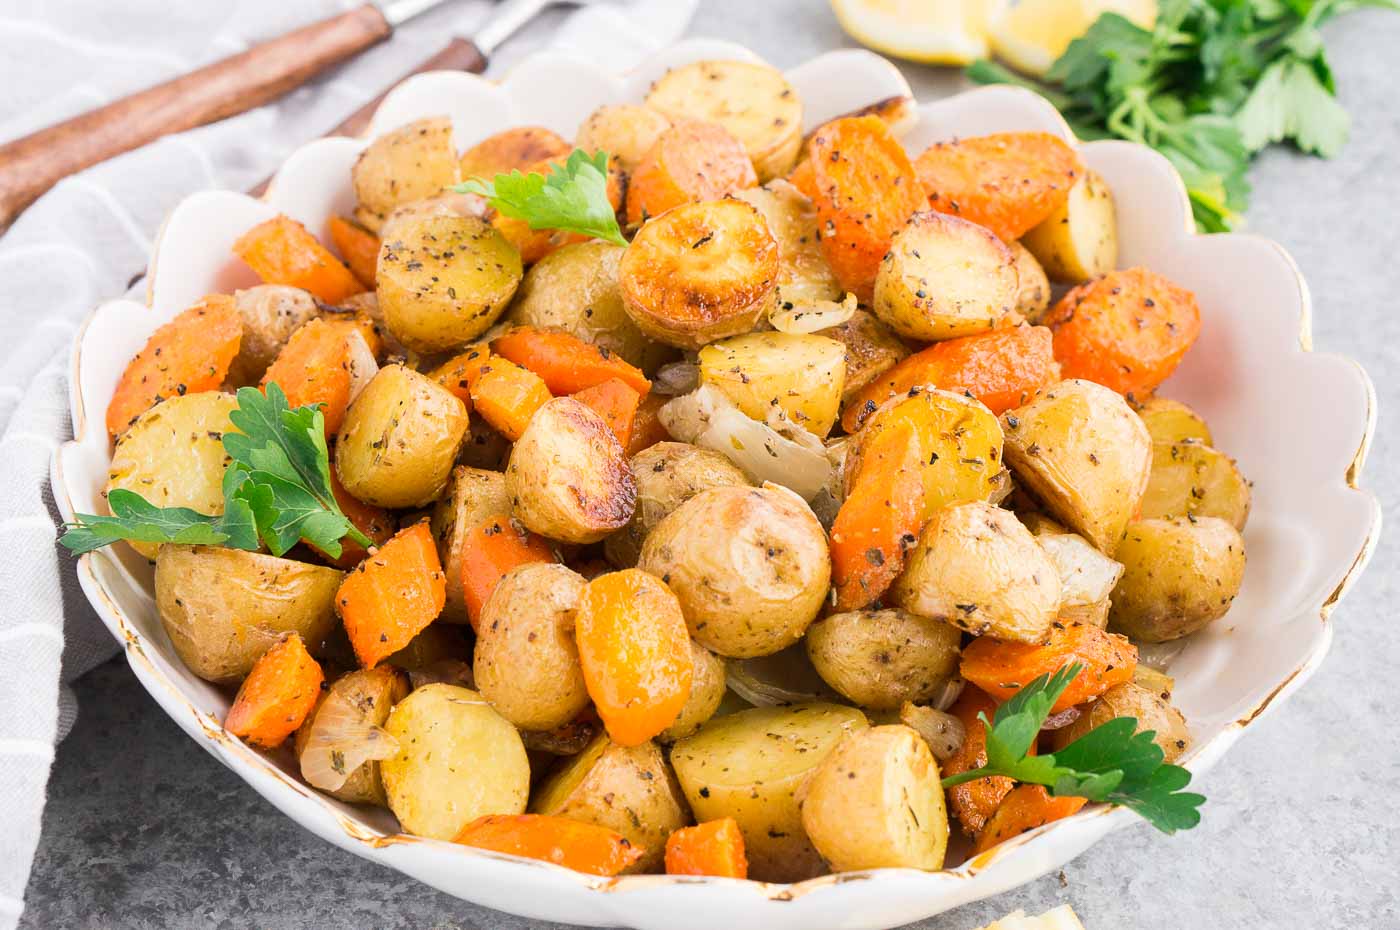 close up image of baked potatoes and carrots in a serving bowl